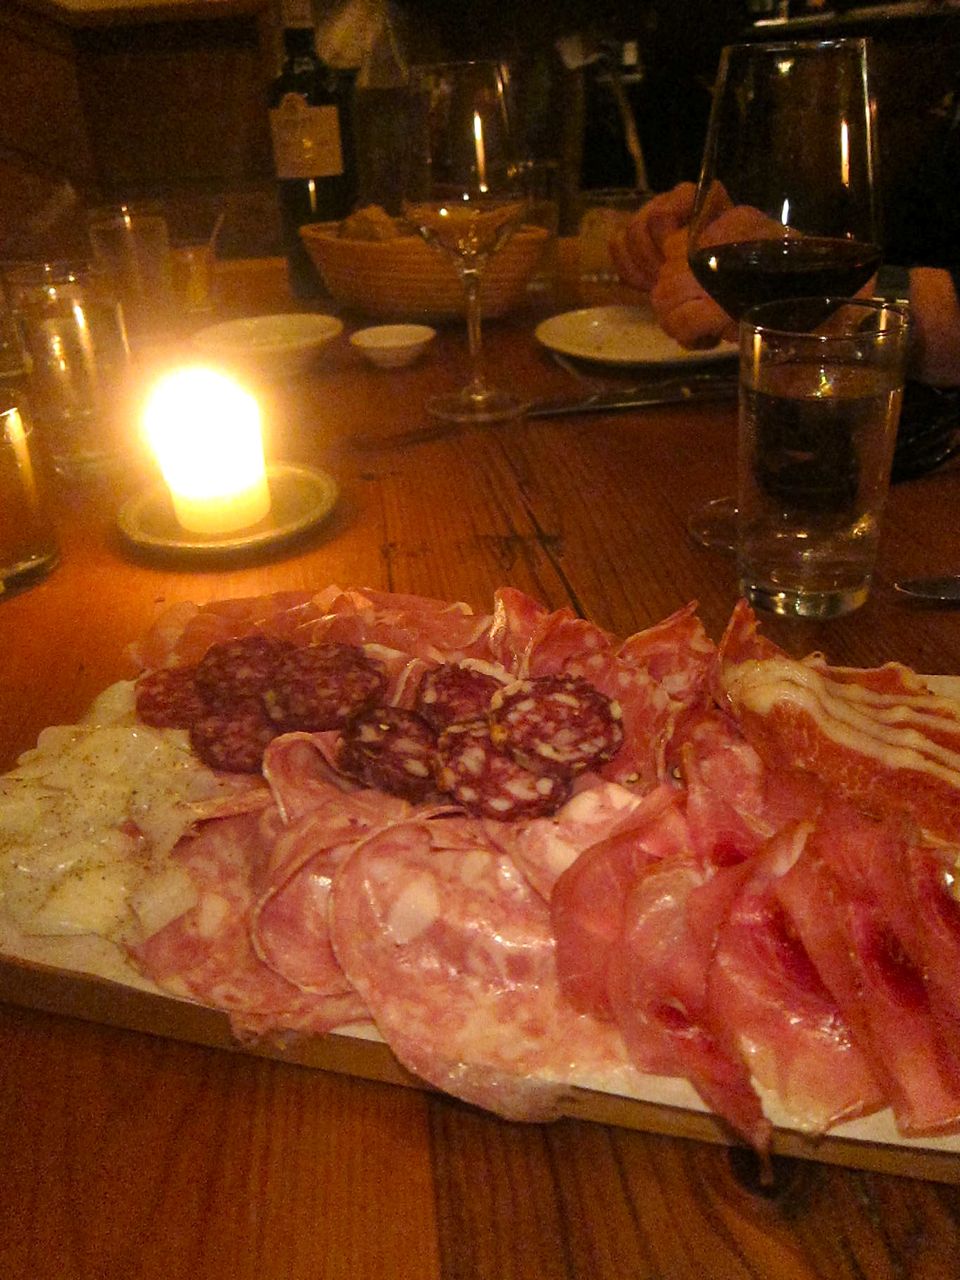 Salumi power: Boutique American pigs, butchered in house, cured by a man named Bernardo.